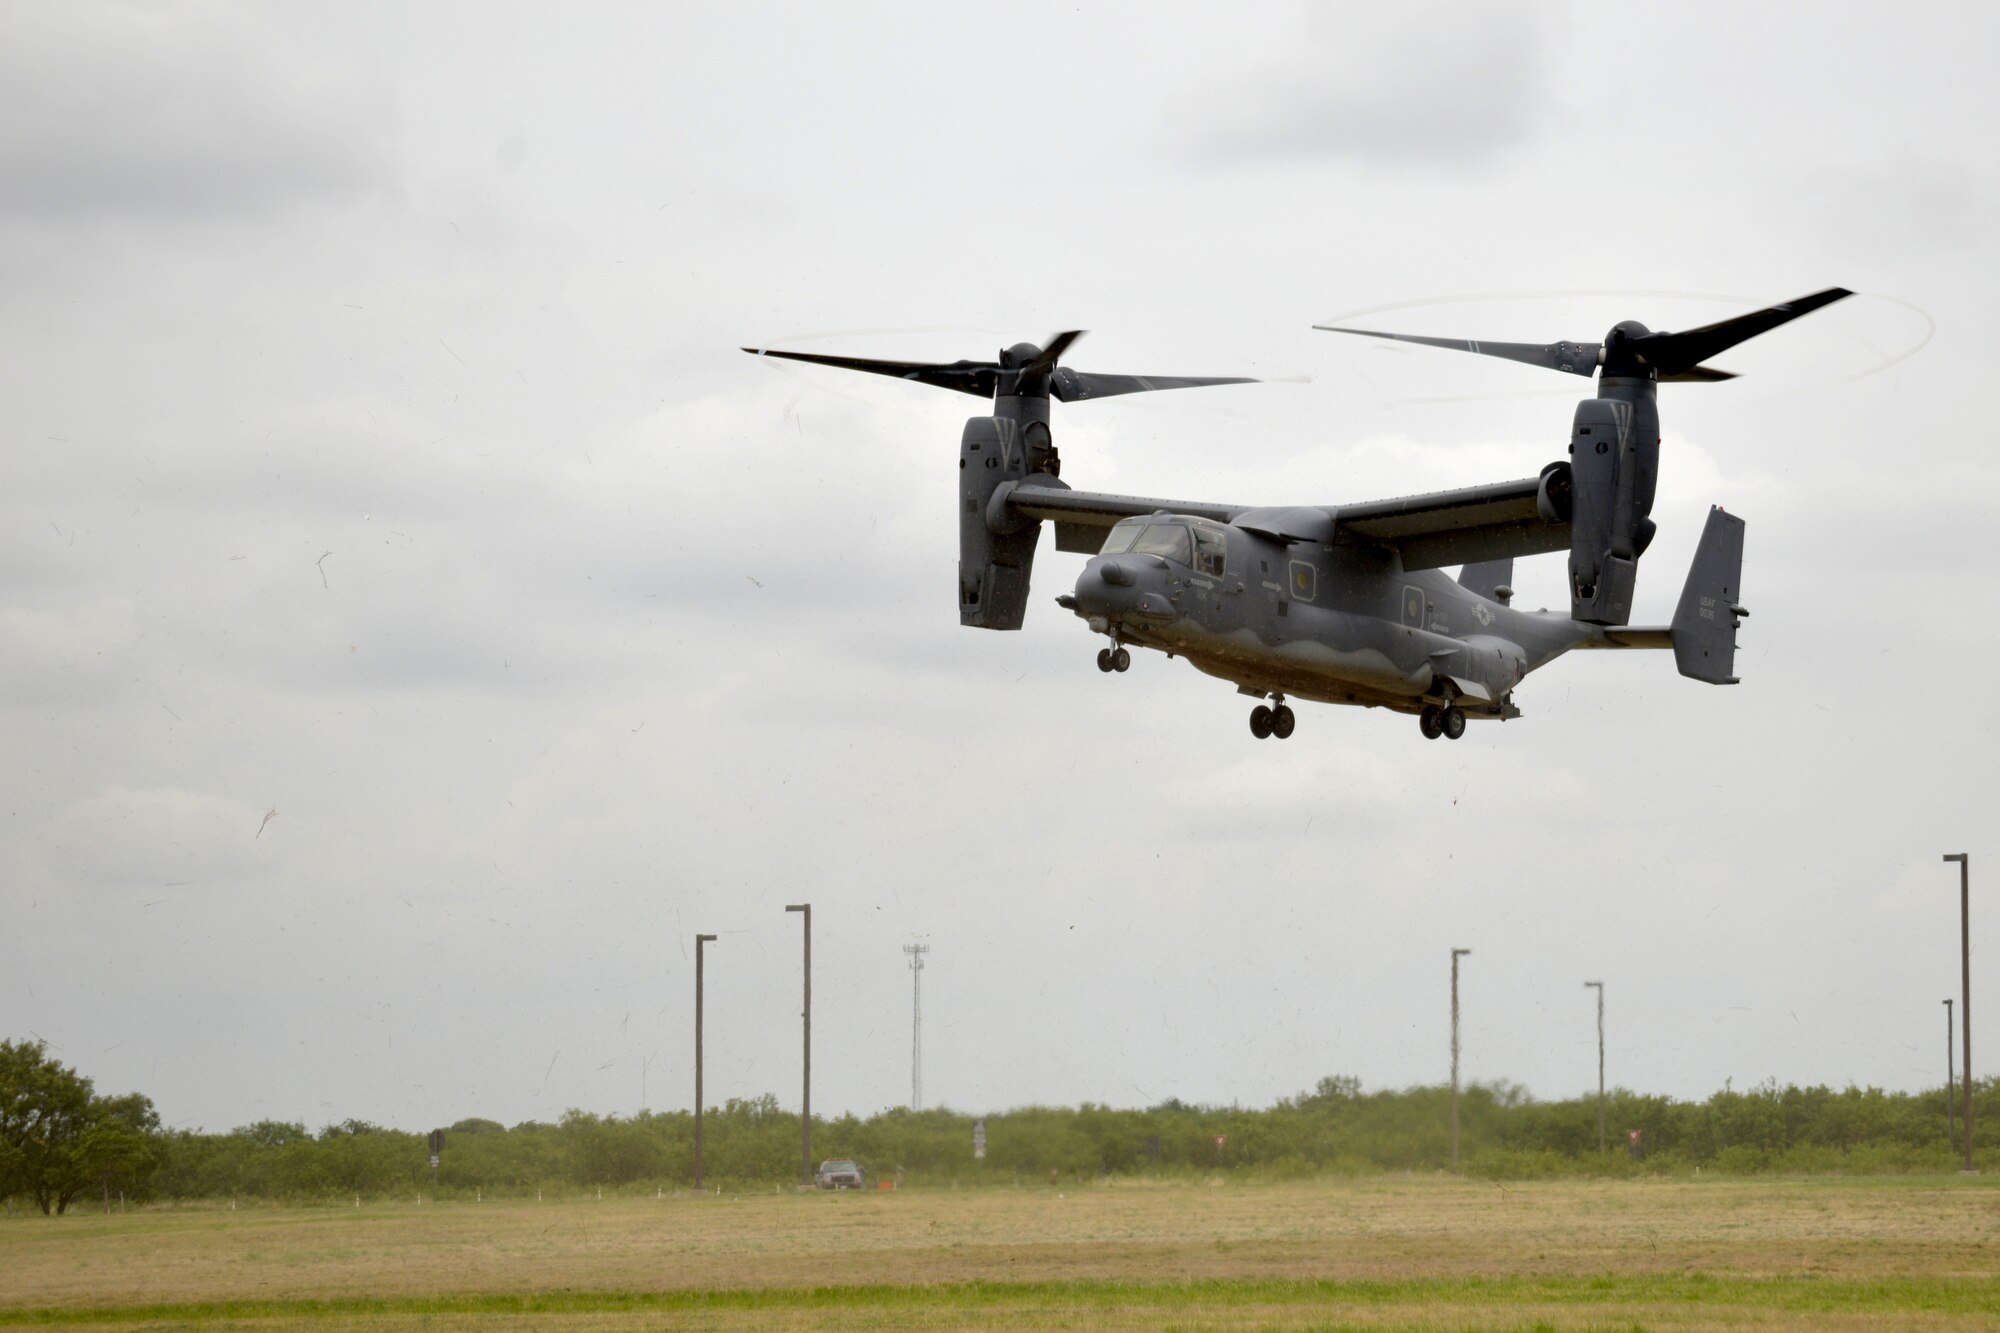 A CV-22 Osprey from the 20th Cannon Air Force Base, New Mexico, lands on Goodfellow Air Force Base, Texas, May 30, 2017. The Osprey brought intelligence personnel from the 20th Operations Squadron back to Goodfellow to give students first-hand experience of the operational Air Force. (U.S. Air Force photo by Airman 1st Class Randall Moose/Released)